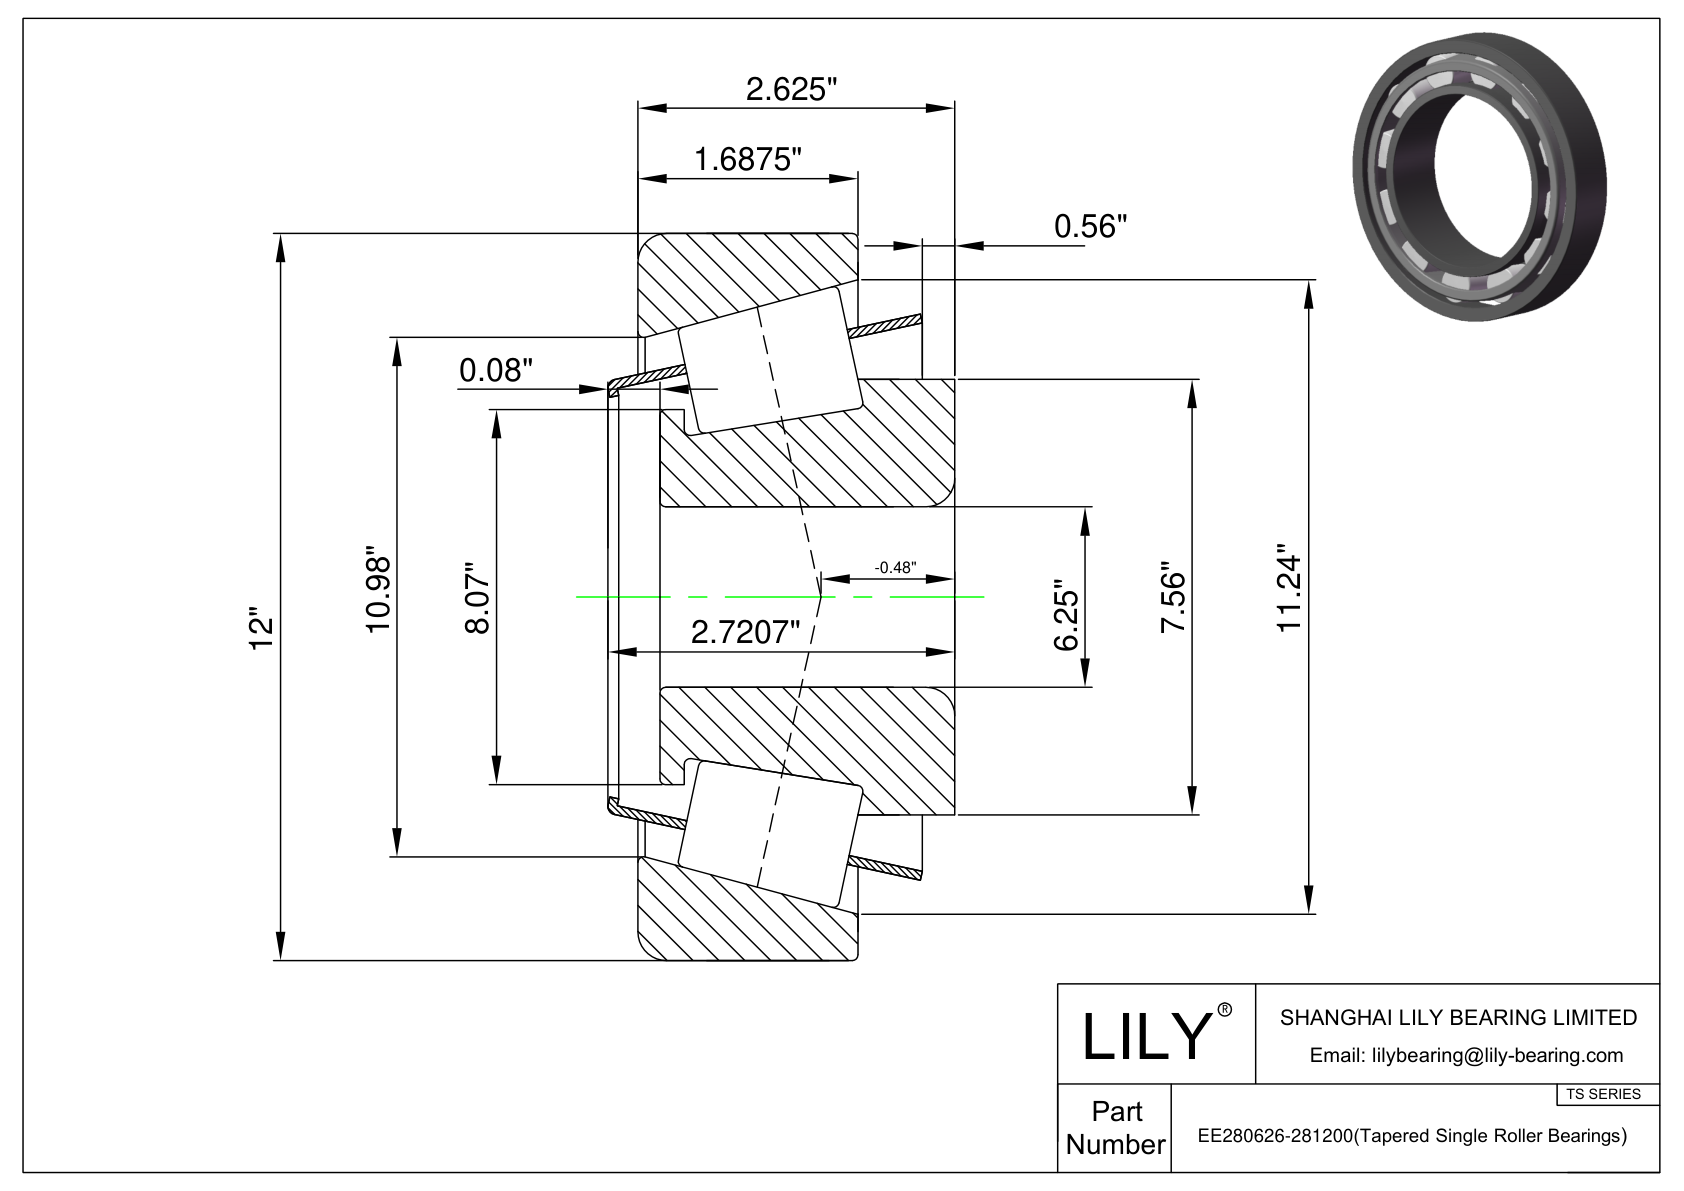 EE280626-281200 TS (Tapered Single Roller Bearings) (Imperial) cad drawing